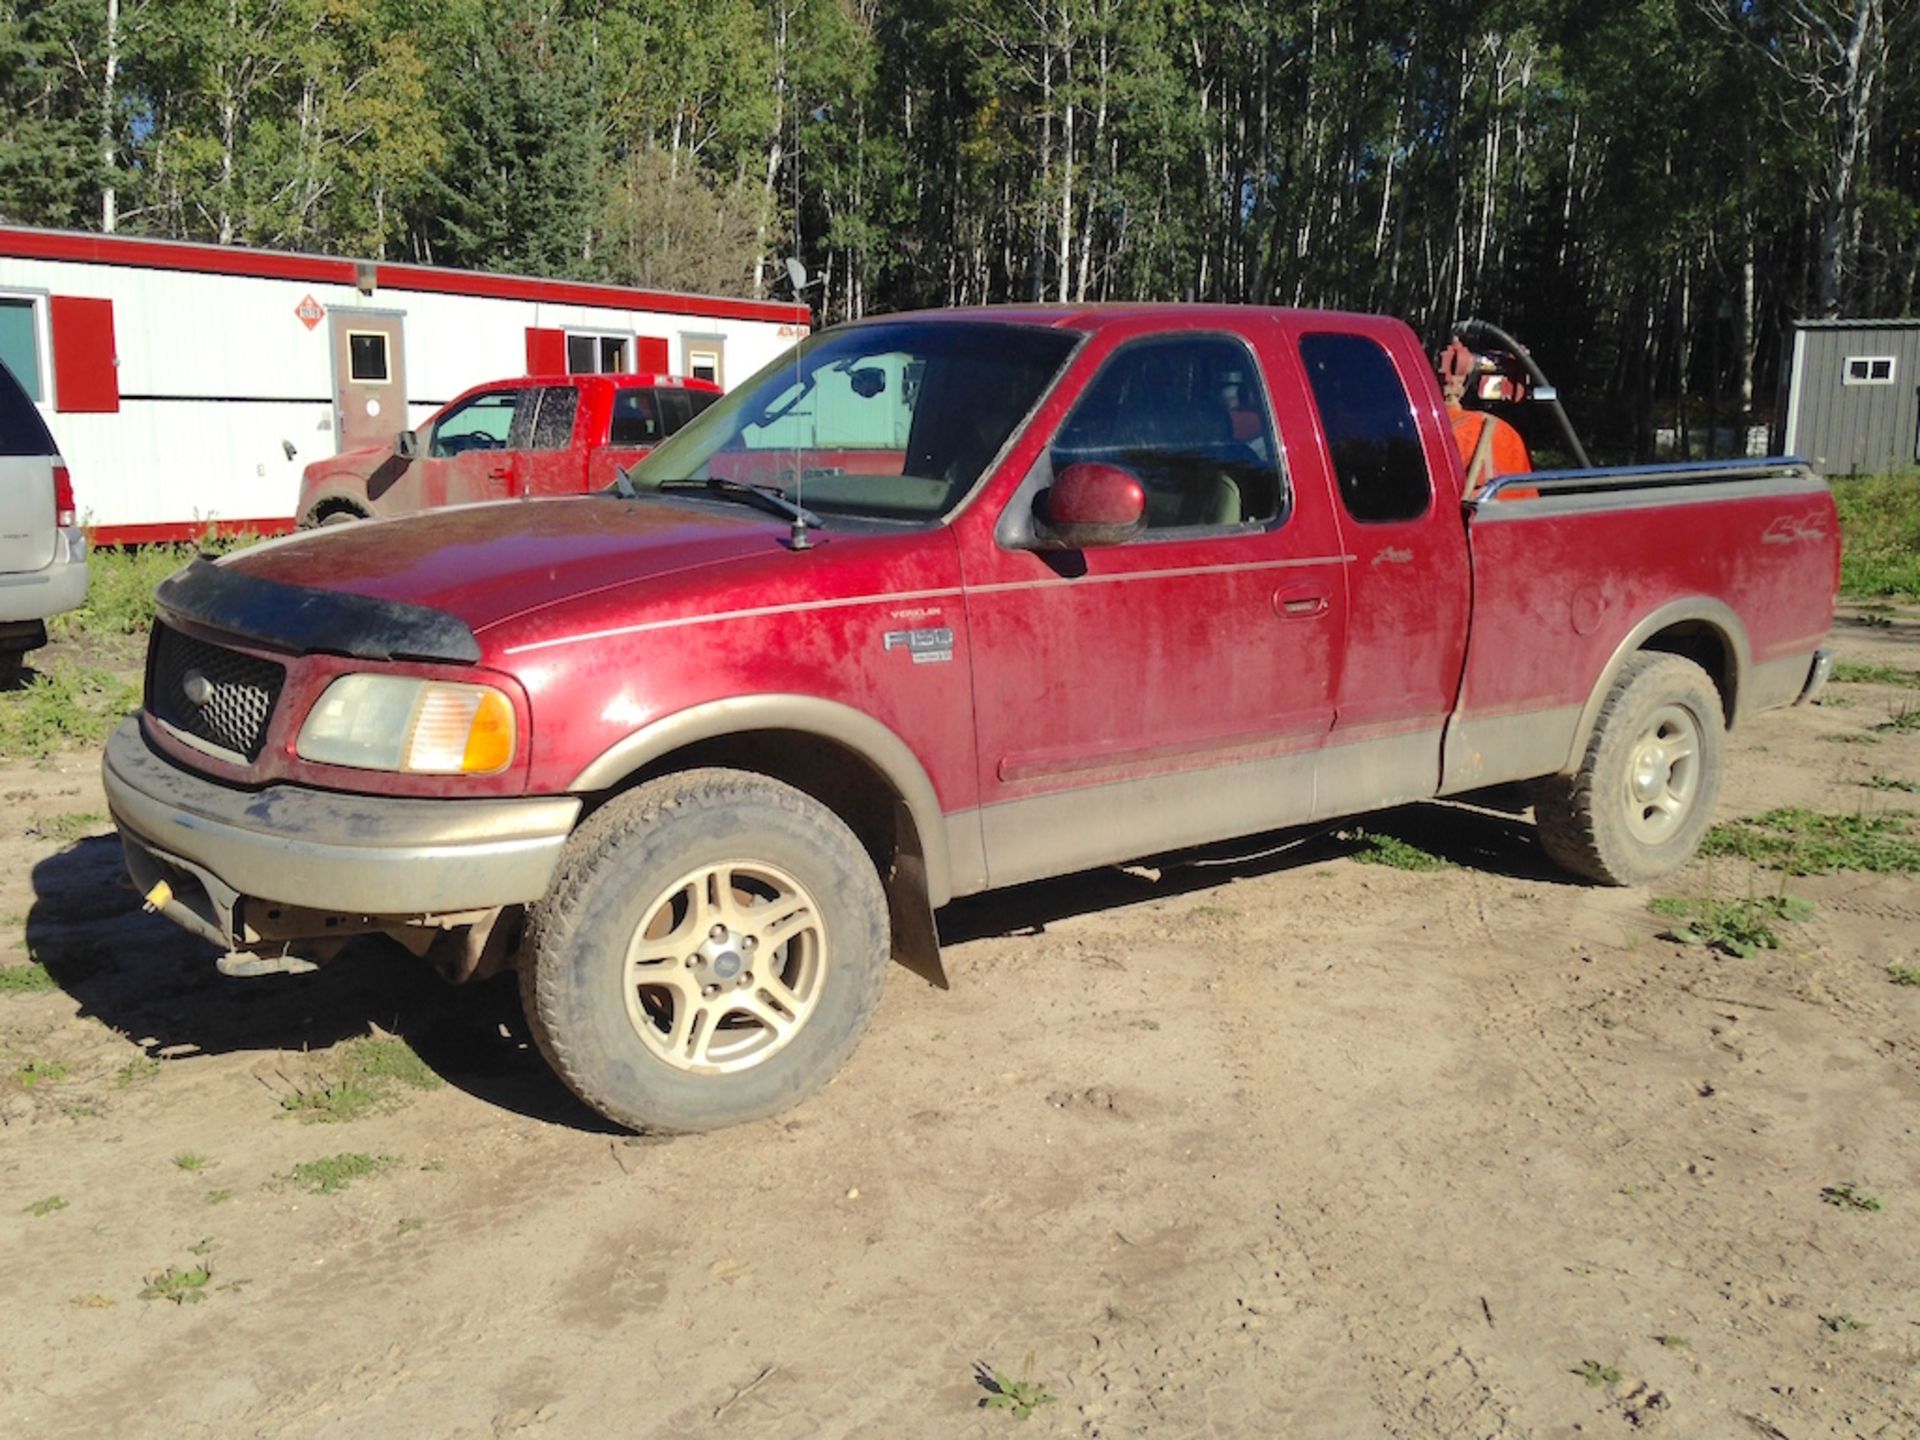 2002 Ford F150 Lariet - Image 7 of 8